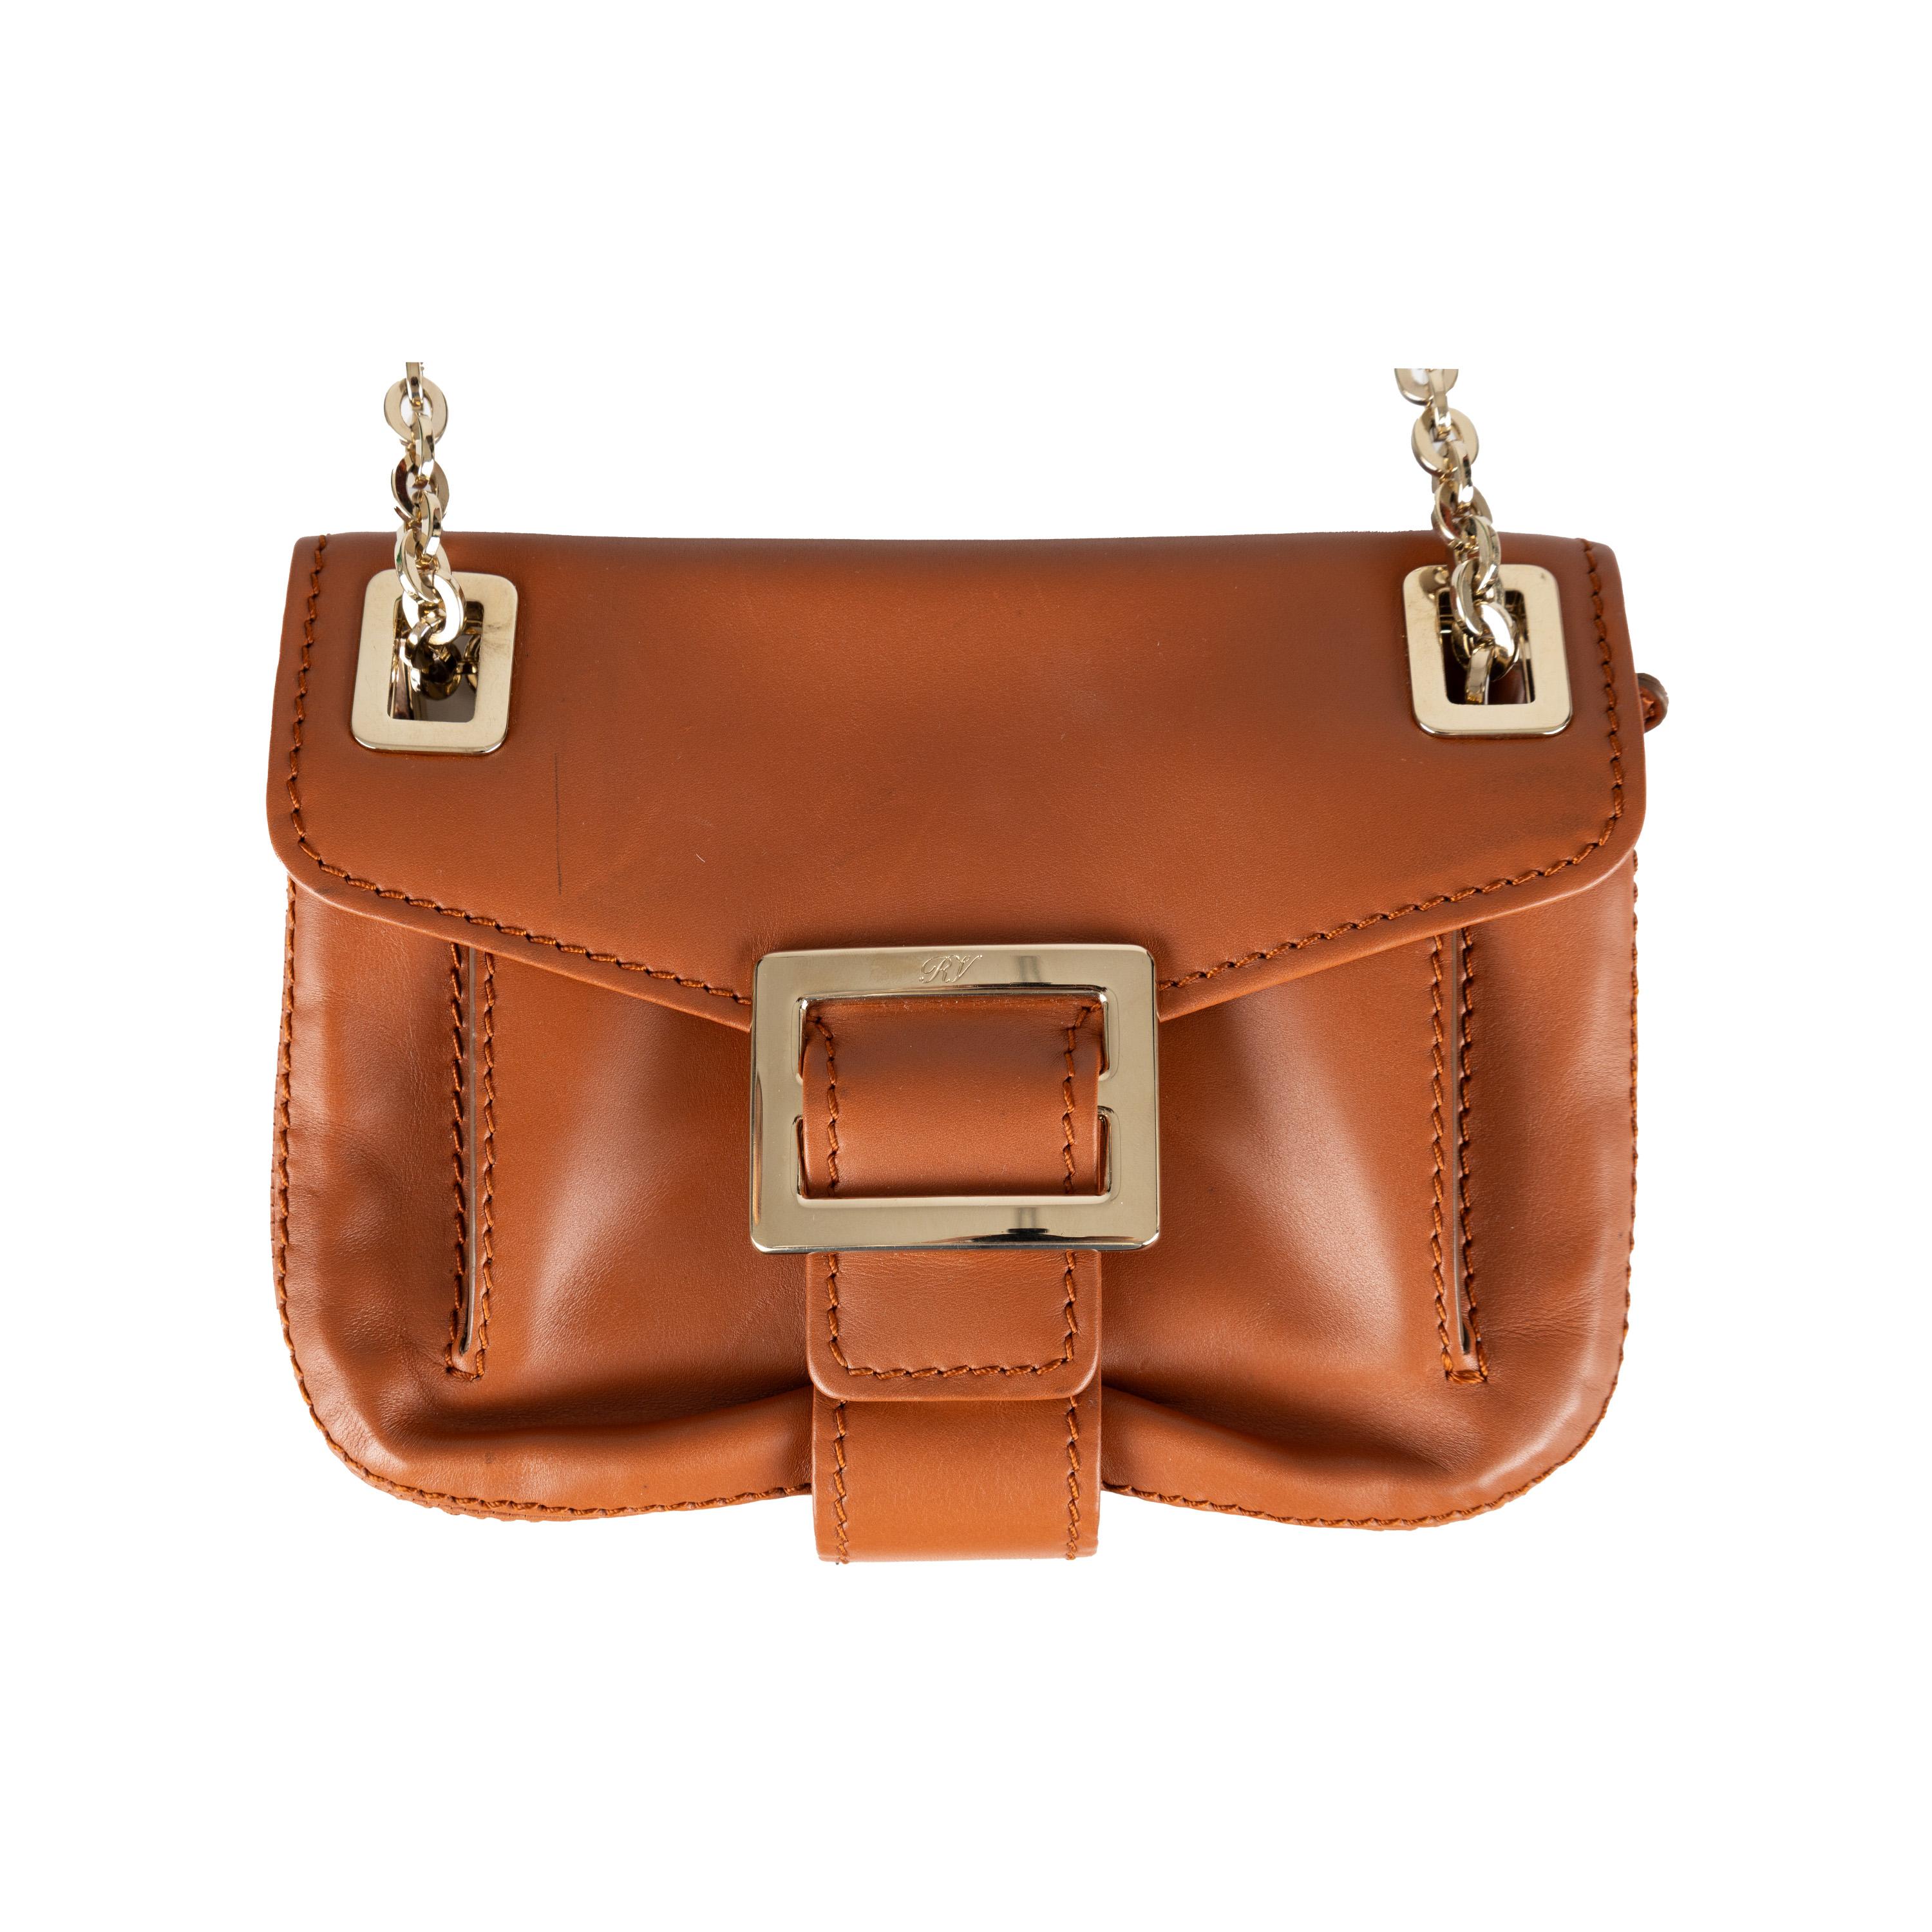 An expertly crafted essential, the Roger Vivier Metro Shoulder Bag is perfect for everyday wear. Crafted from tan brown leather, it features gold-tone hardware and plenty of room in its three interior compartments, even for its compact size. For